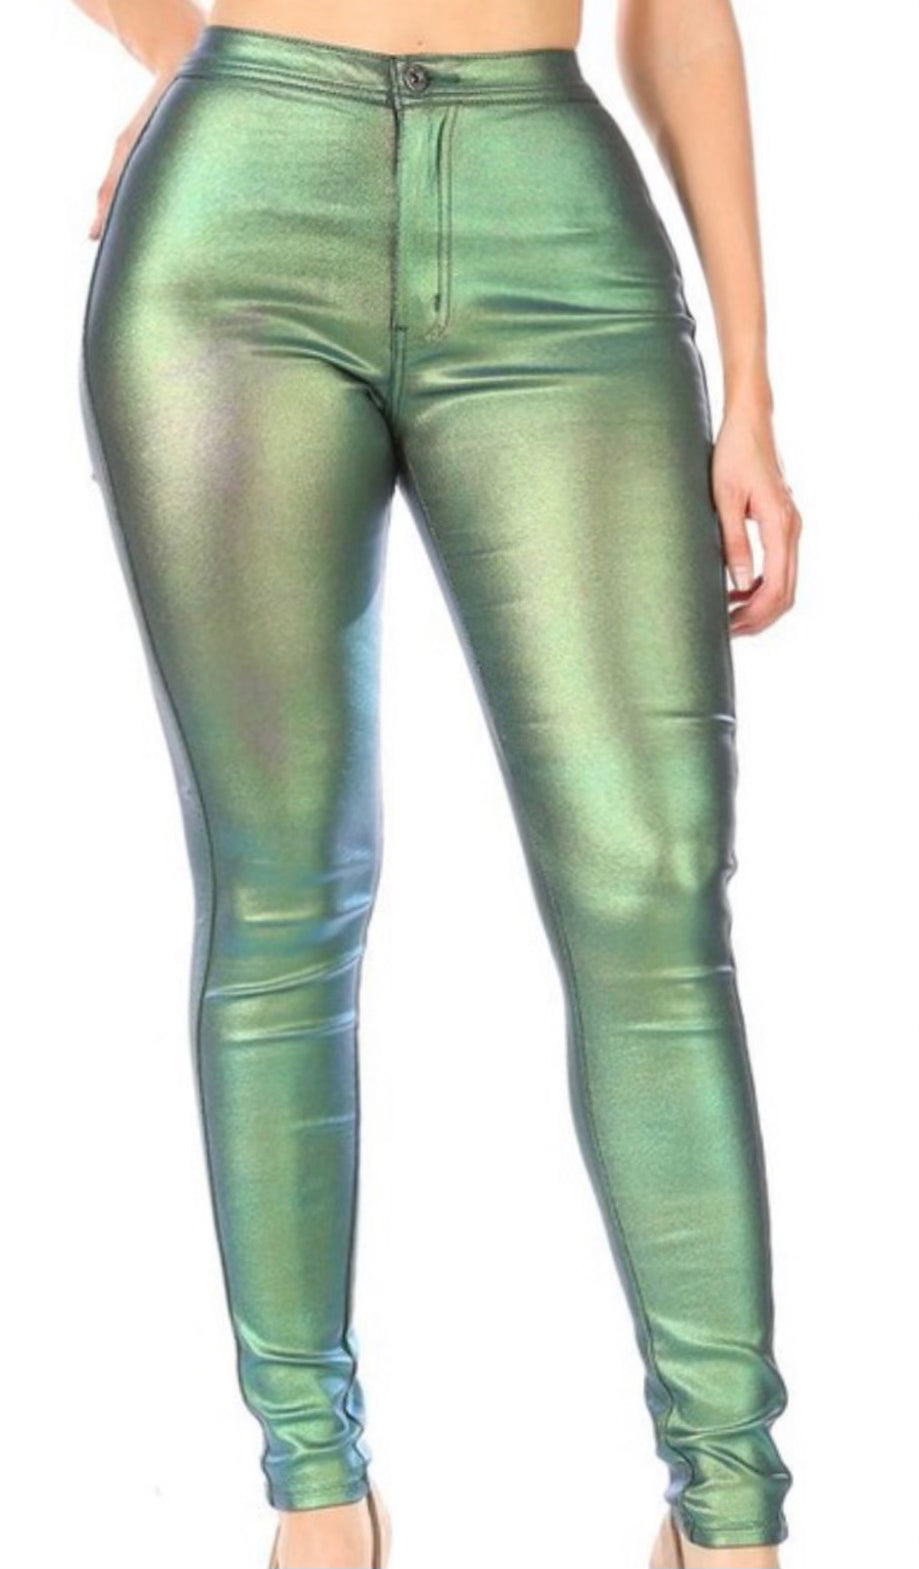 Metallic Jeans perfect Fit collection